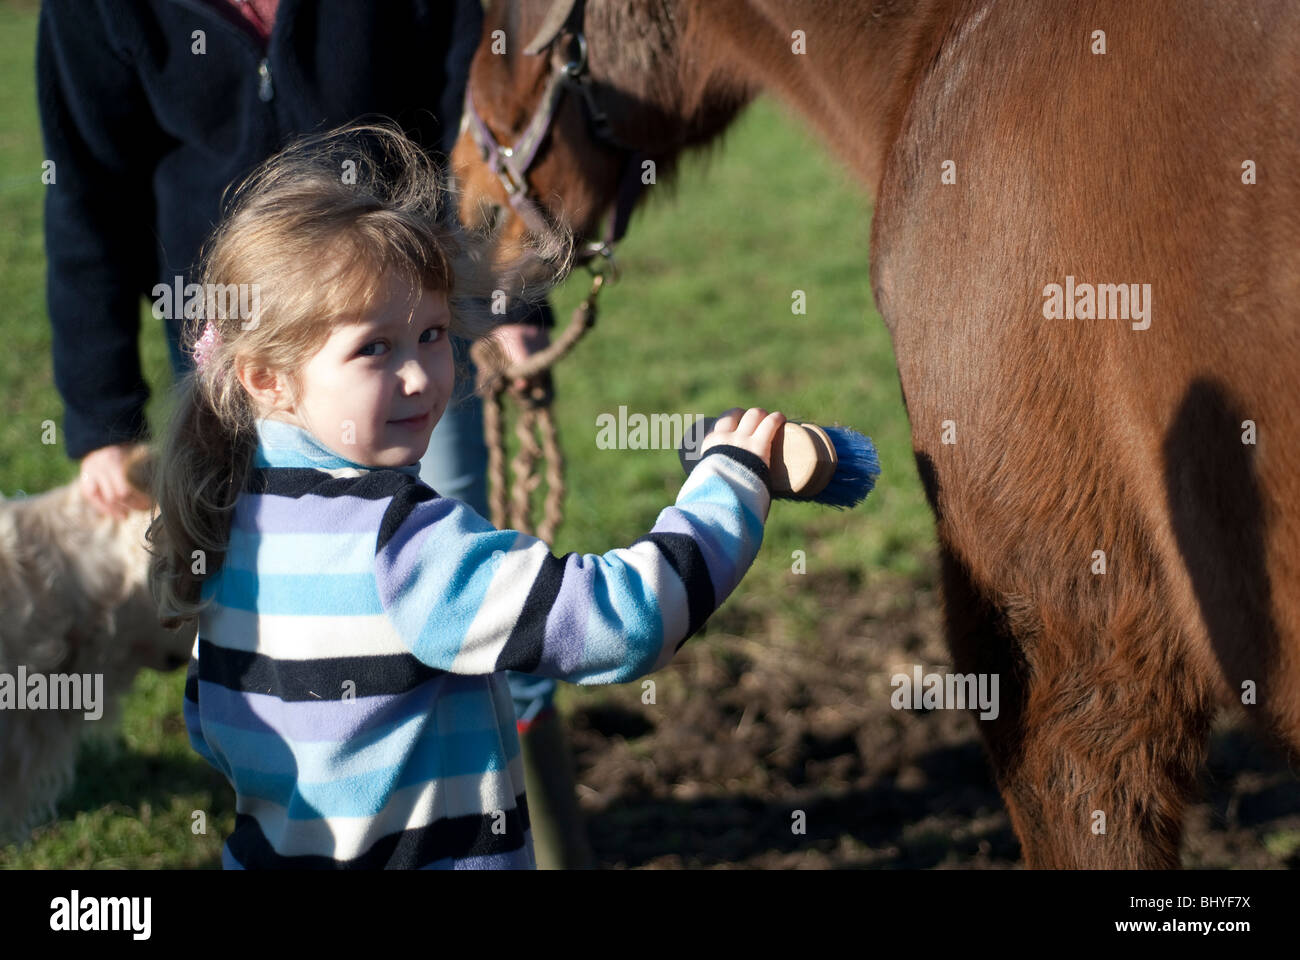 Young girl brushing pet horse. FULLY MODEL RELEASED Stock Photo